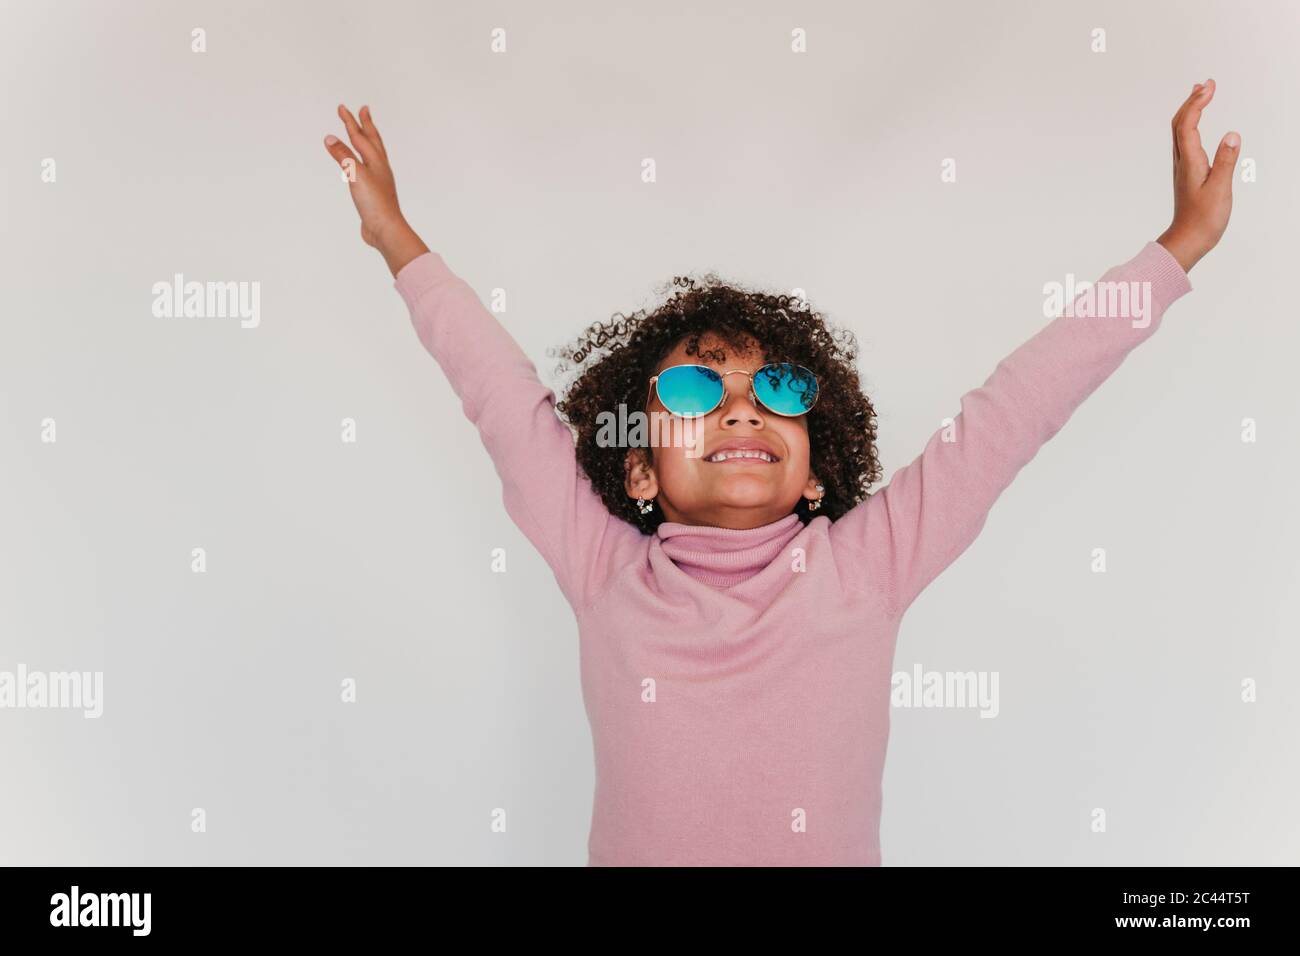 Portrait of happy little girl wearing pink turtleneck pullover and mirrored sunglasses Stock Photo